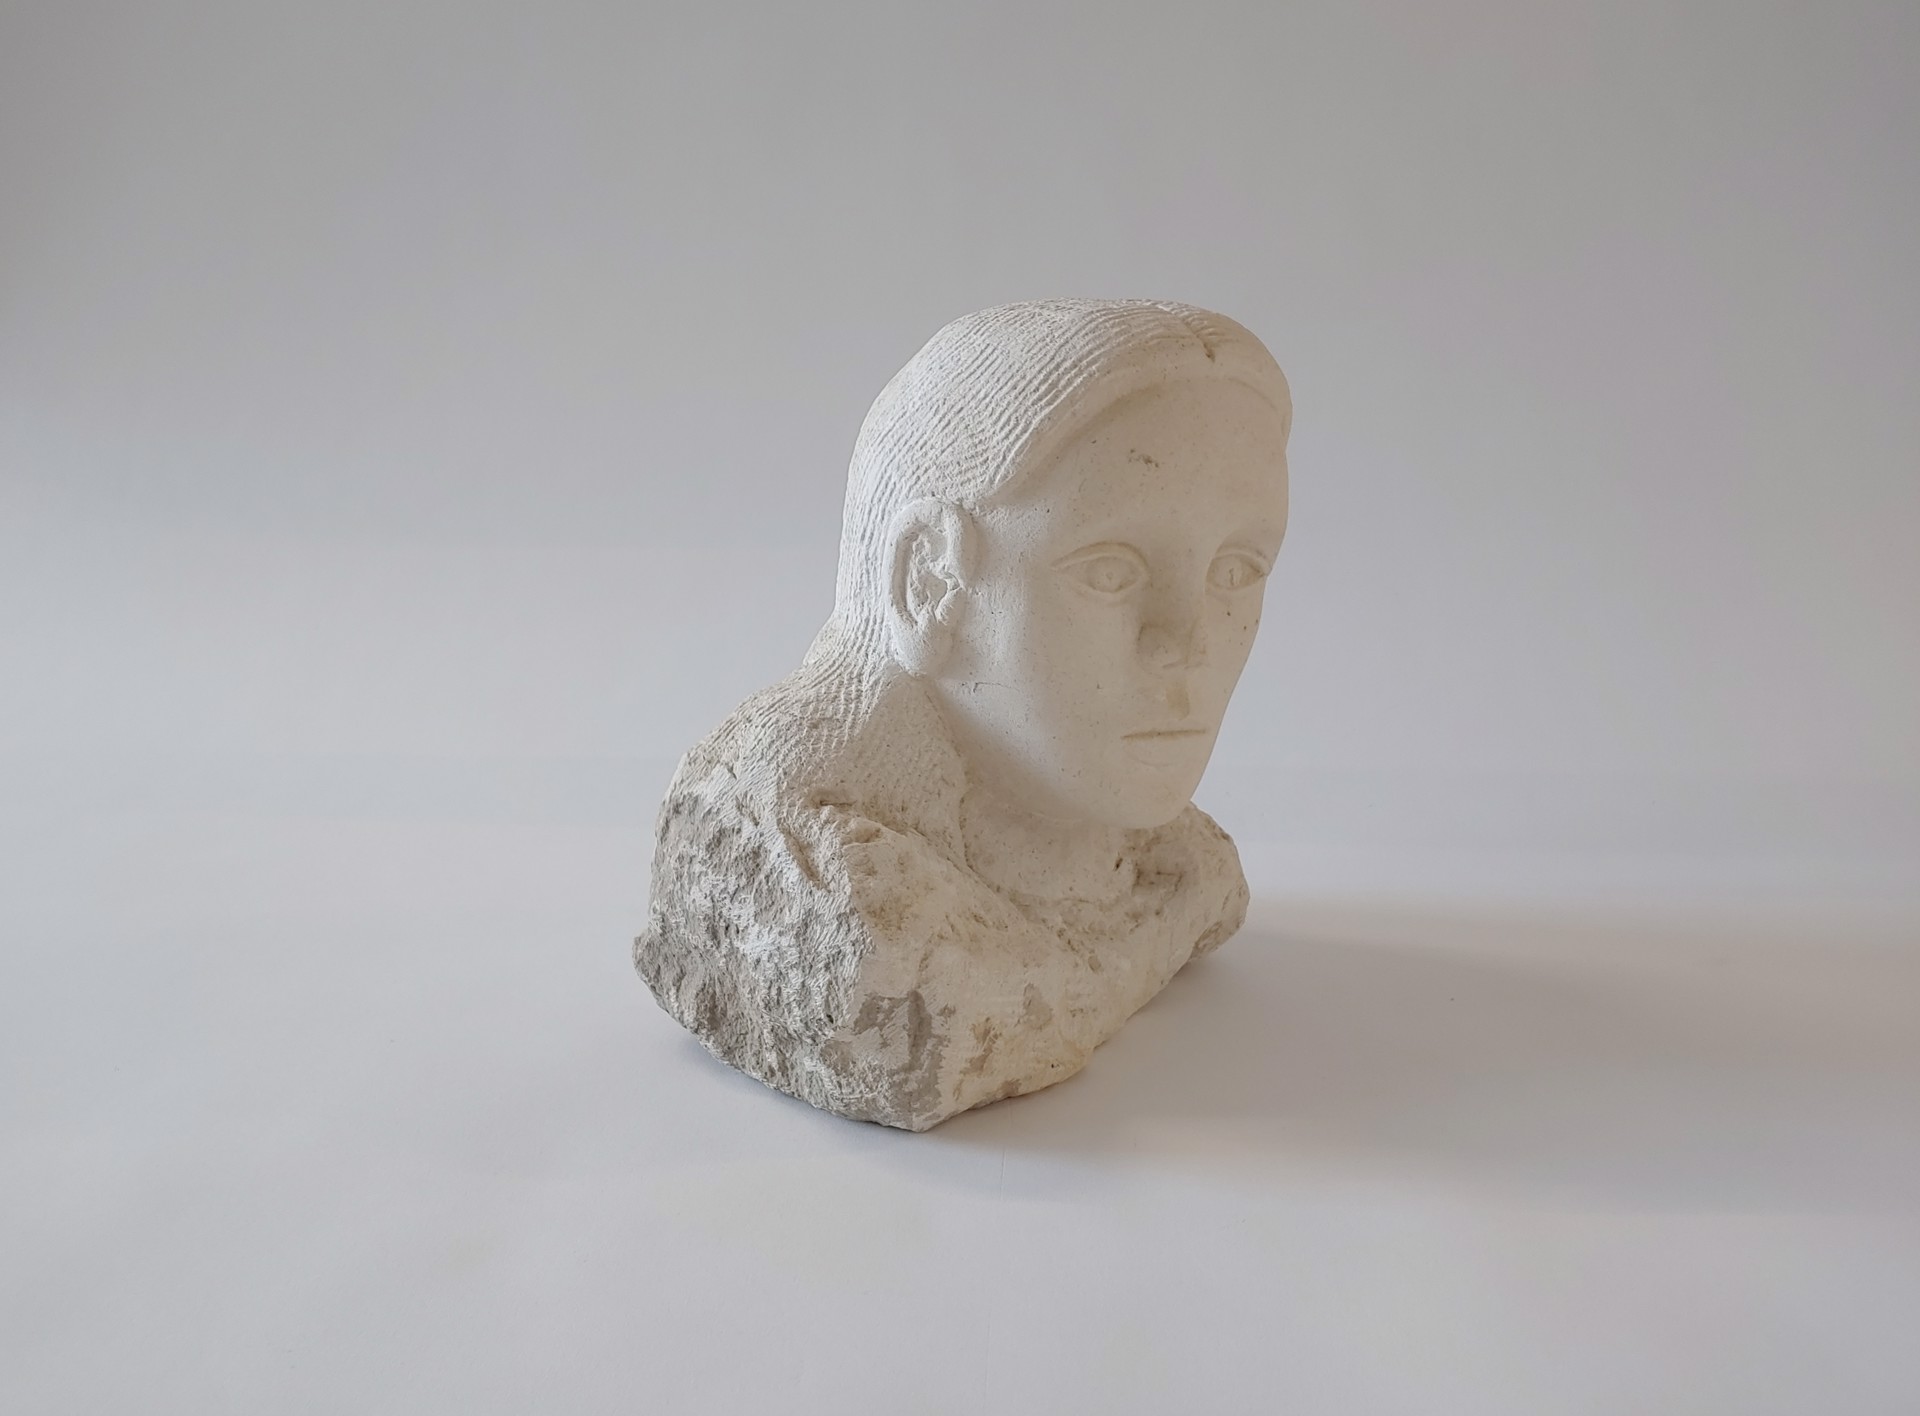 Woman's Stone Bust #2 - Stone Sculpture by David Amdur